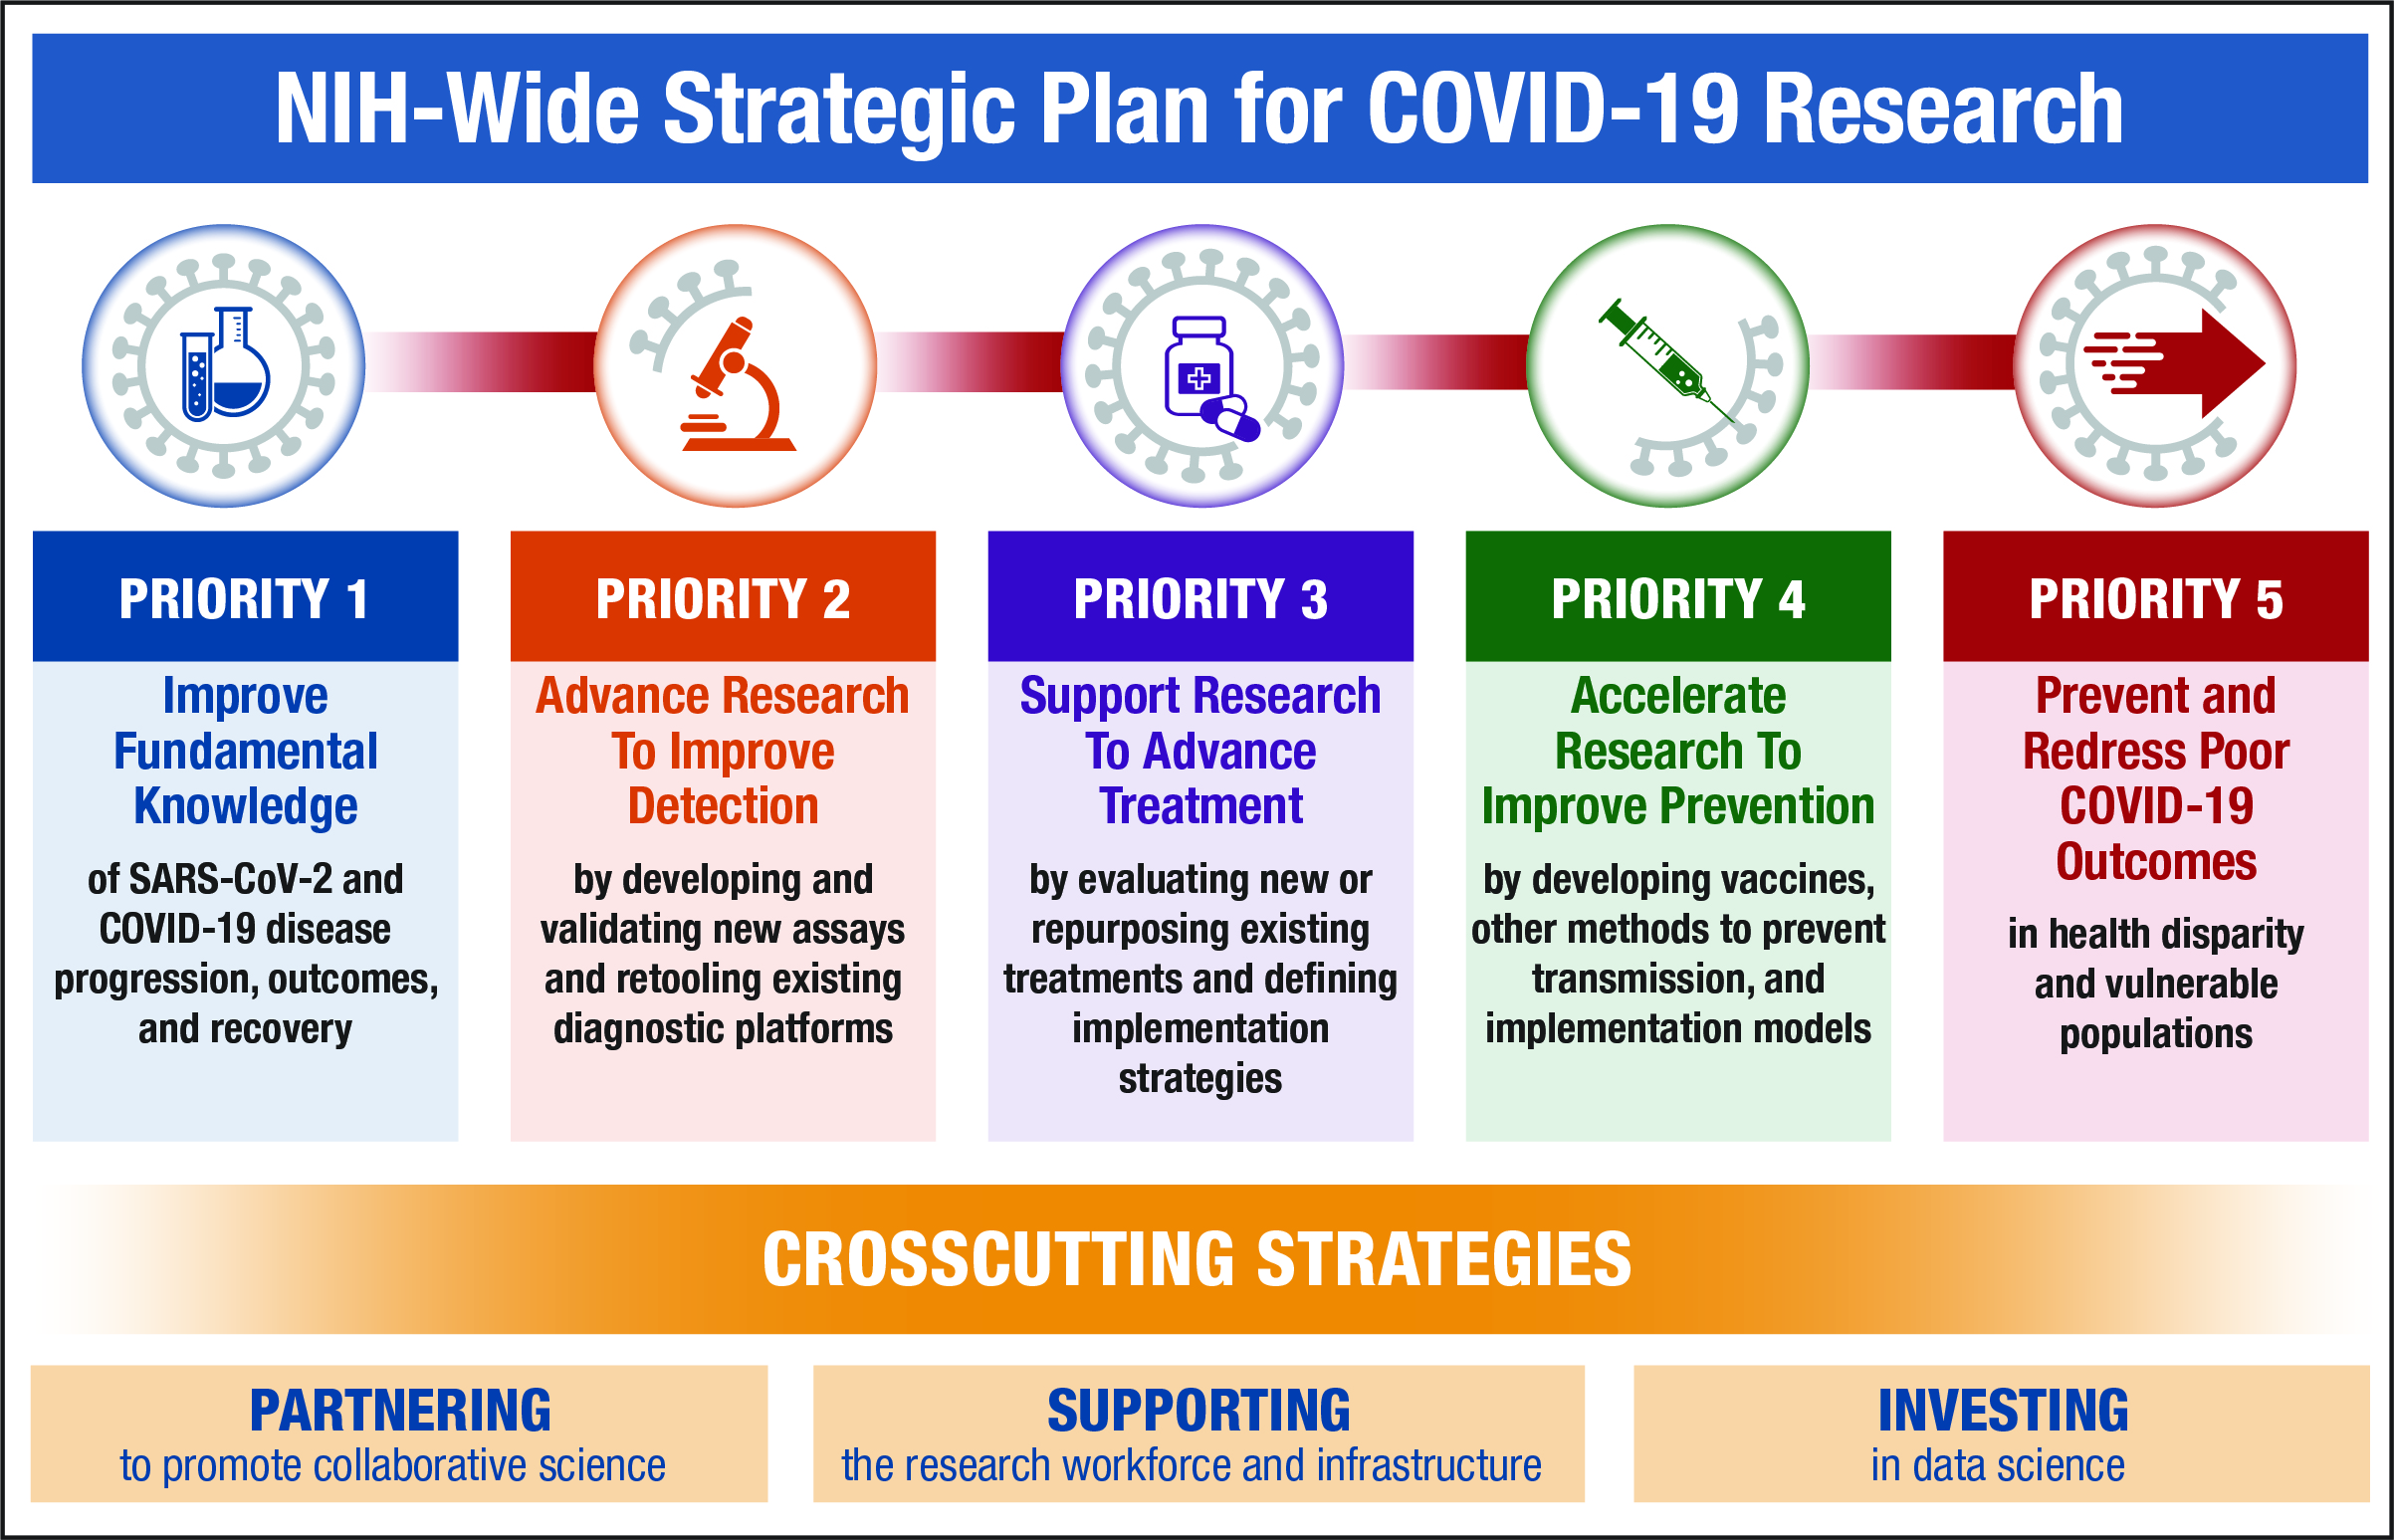 strategic planning for business during covid 19